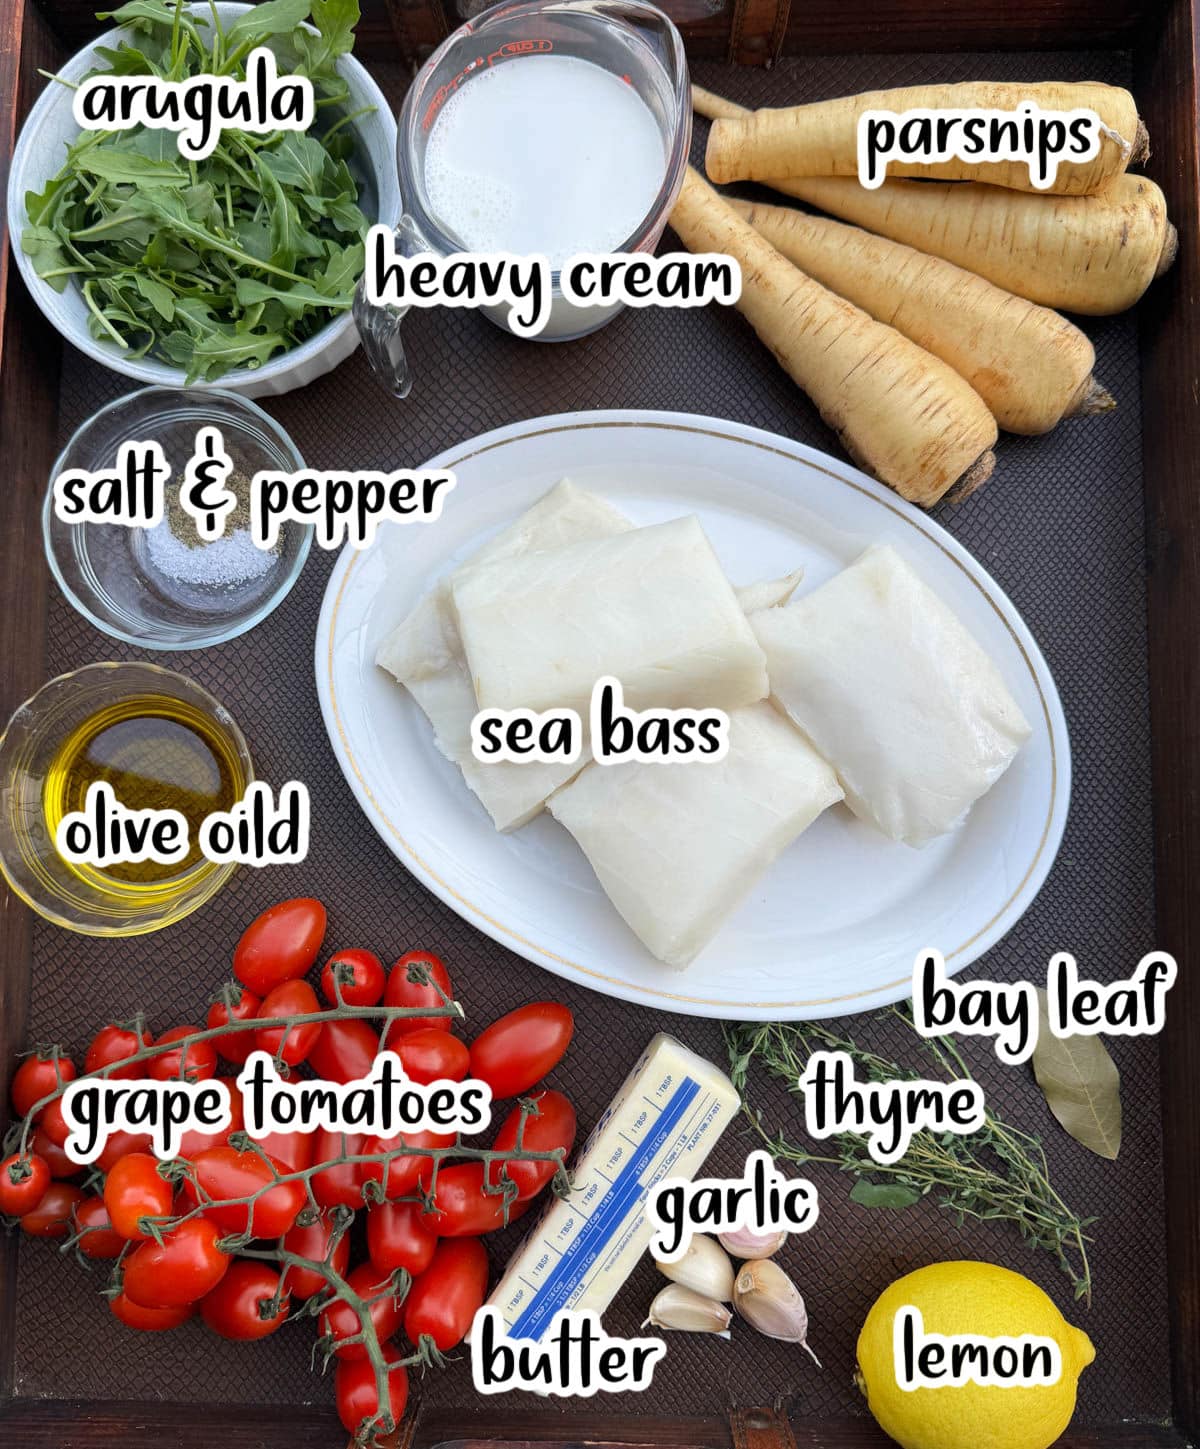 Ingredients listed include arugula, cream, parsnip, salt and pepper, sea bass, olive oil, tomatoes, butter, garlic, lemon, and herbs.